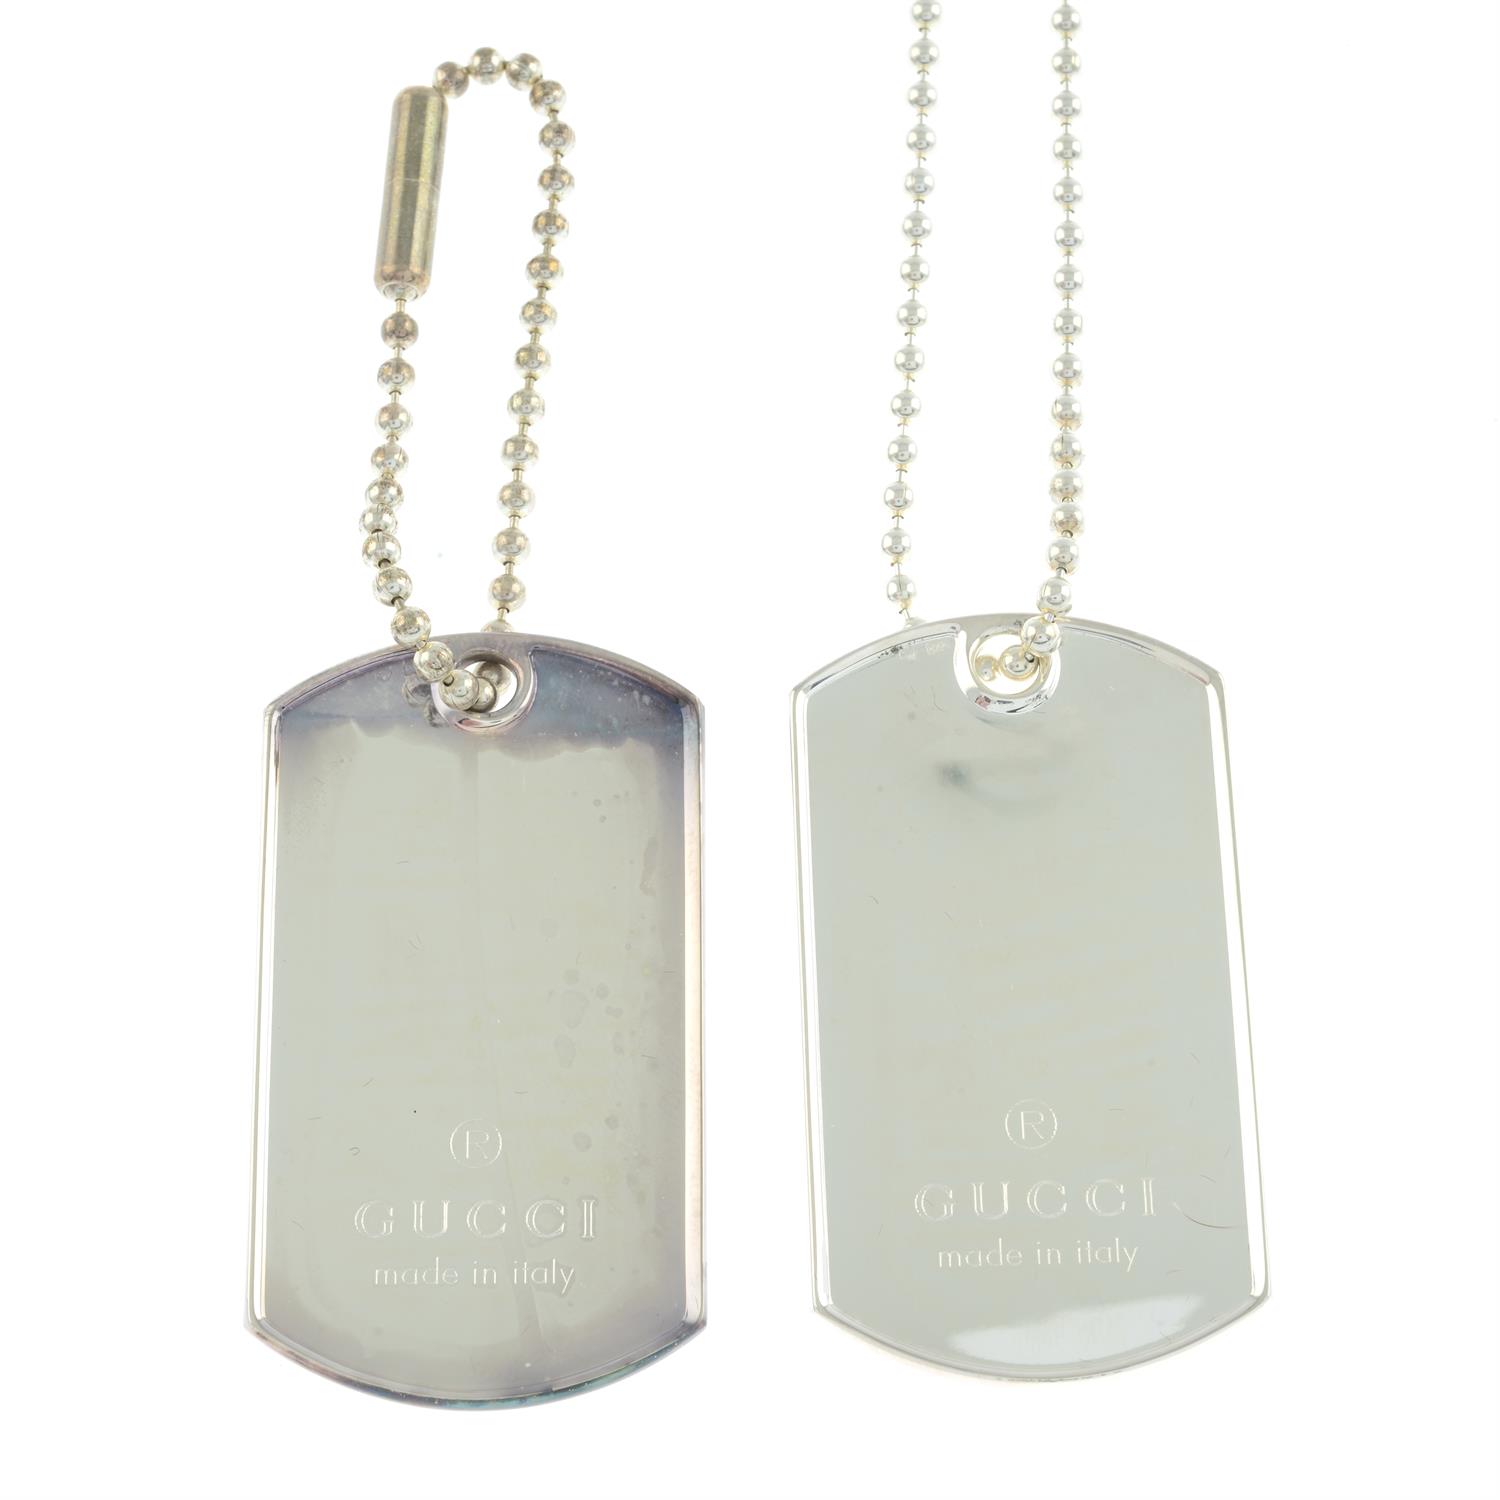 Gucci - two silver dog tags on chain.